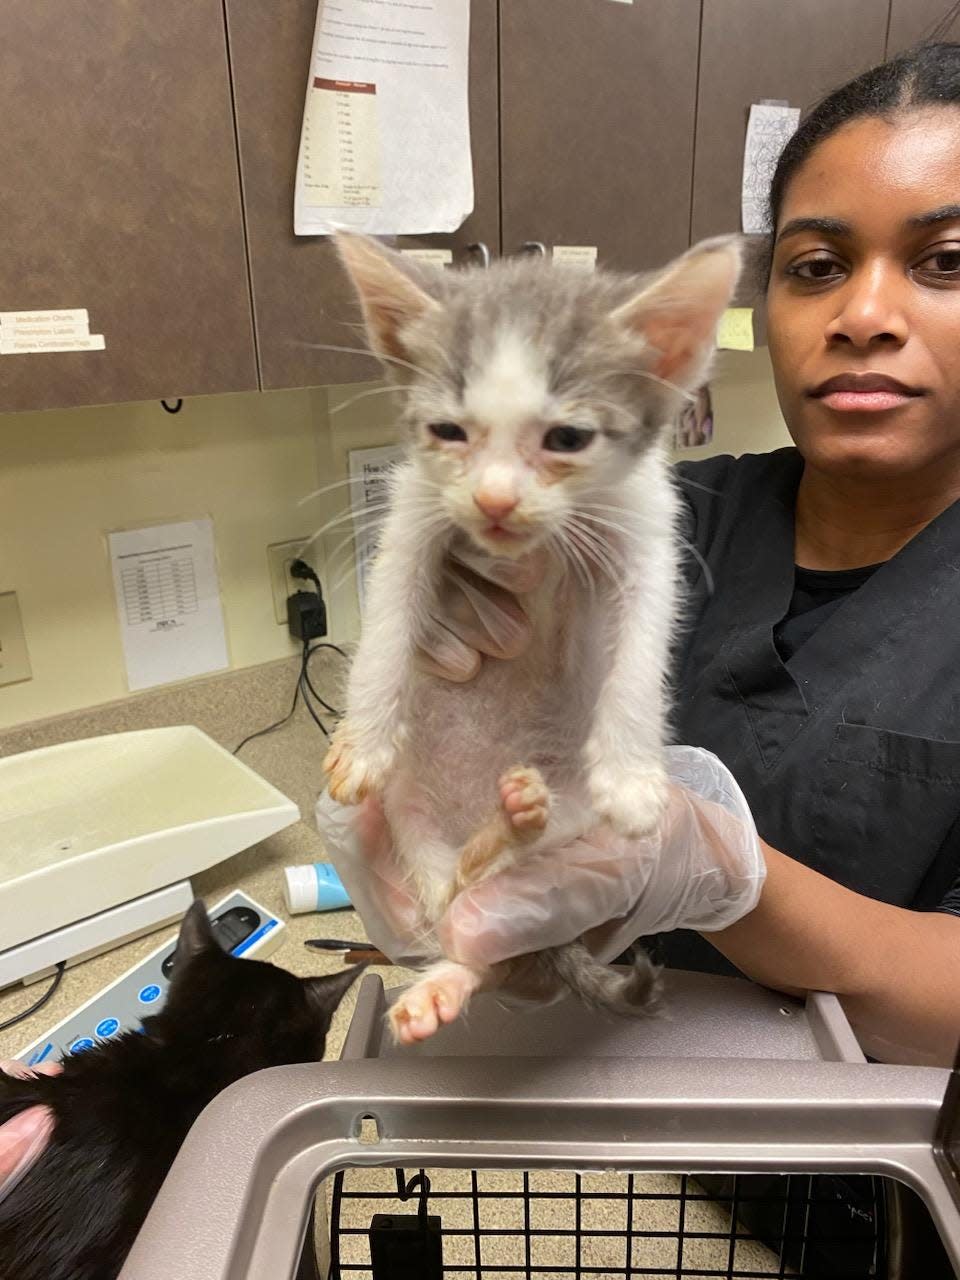 Clinic Technician Victoria Searcy examines one of the sick kittens upon intake at the Bucks County SPCA's Quakertown shelter.  The cat is one of 51 recently seized in a hoarding case.